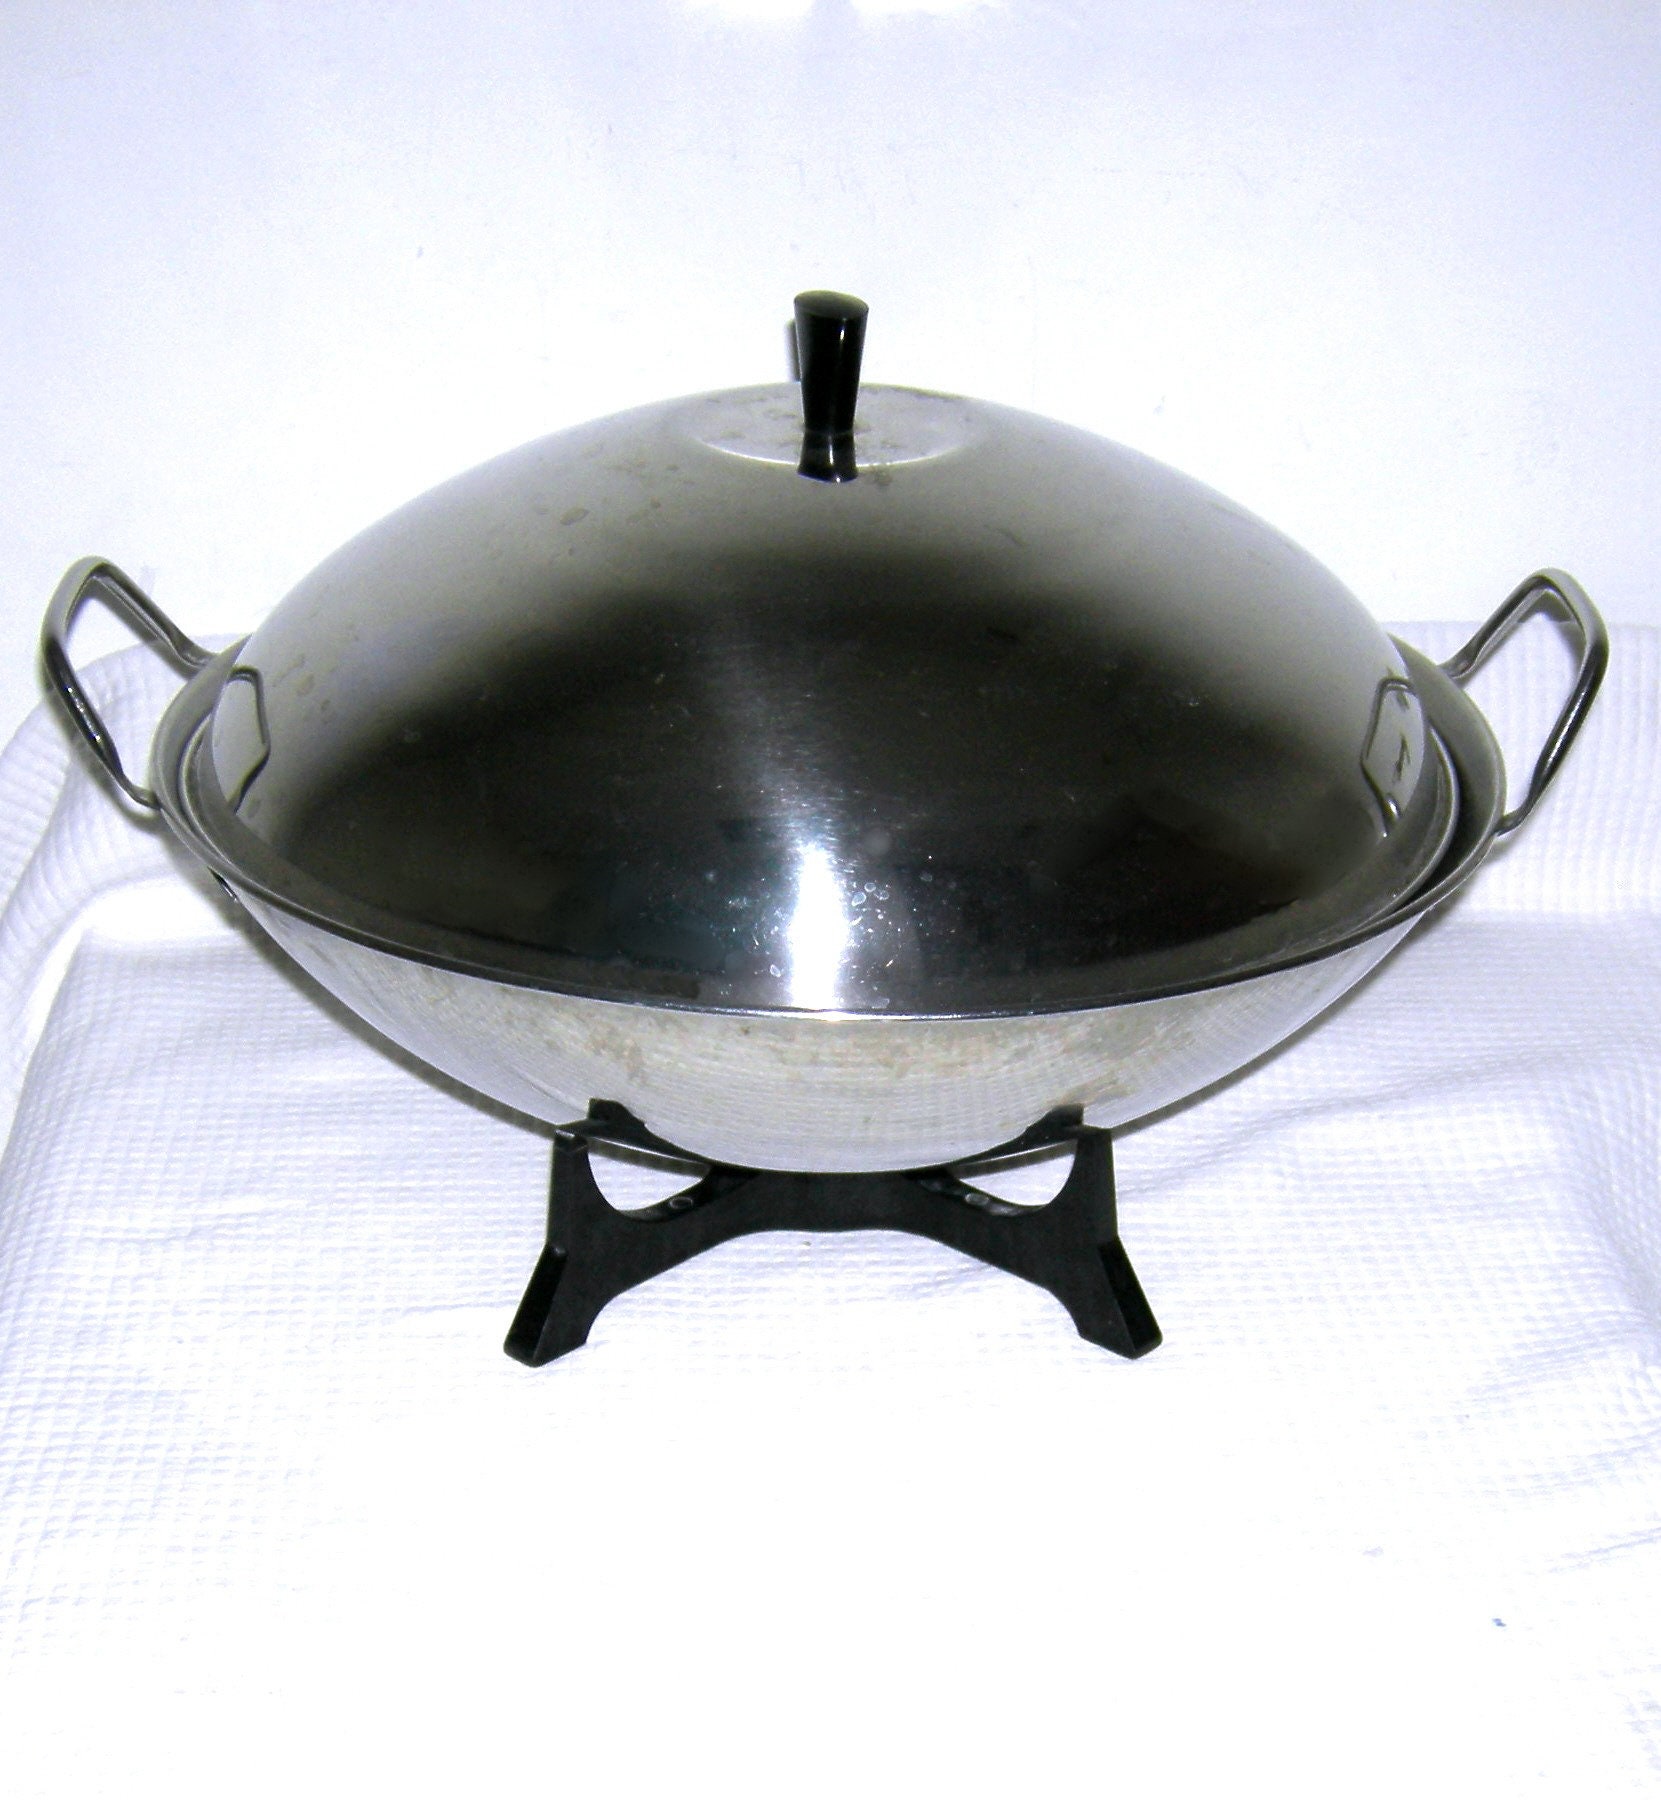 Vintage Farberware WOK 14 Electric Skillet Cord Model 303 Frying Pan  Stainless Steel Aluminum CLAD Mid Century Atomic Kitchen Appliance 